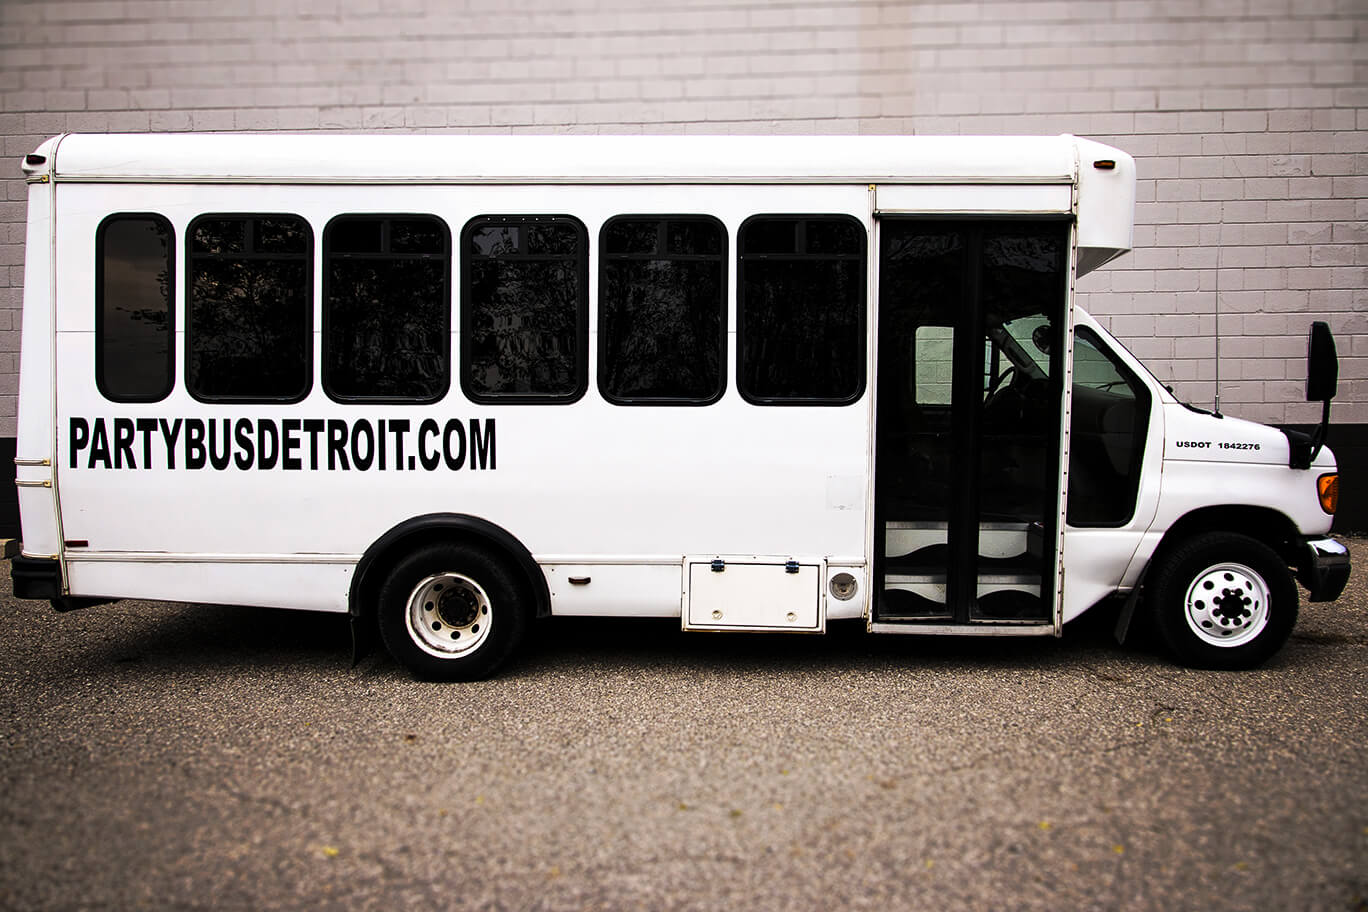  party bus with modern amenities